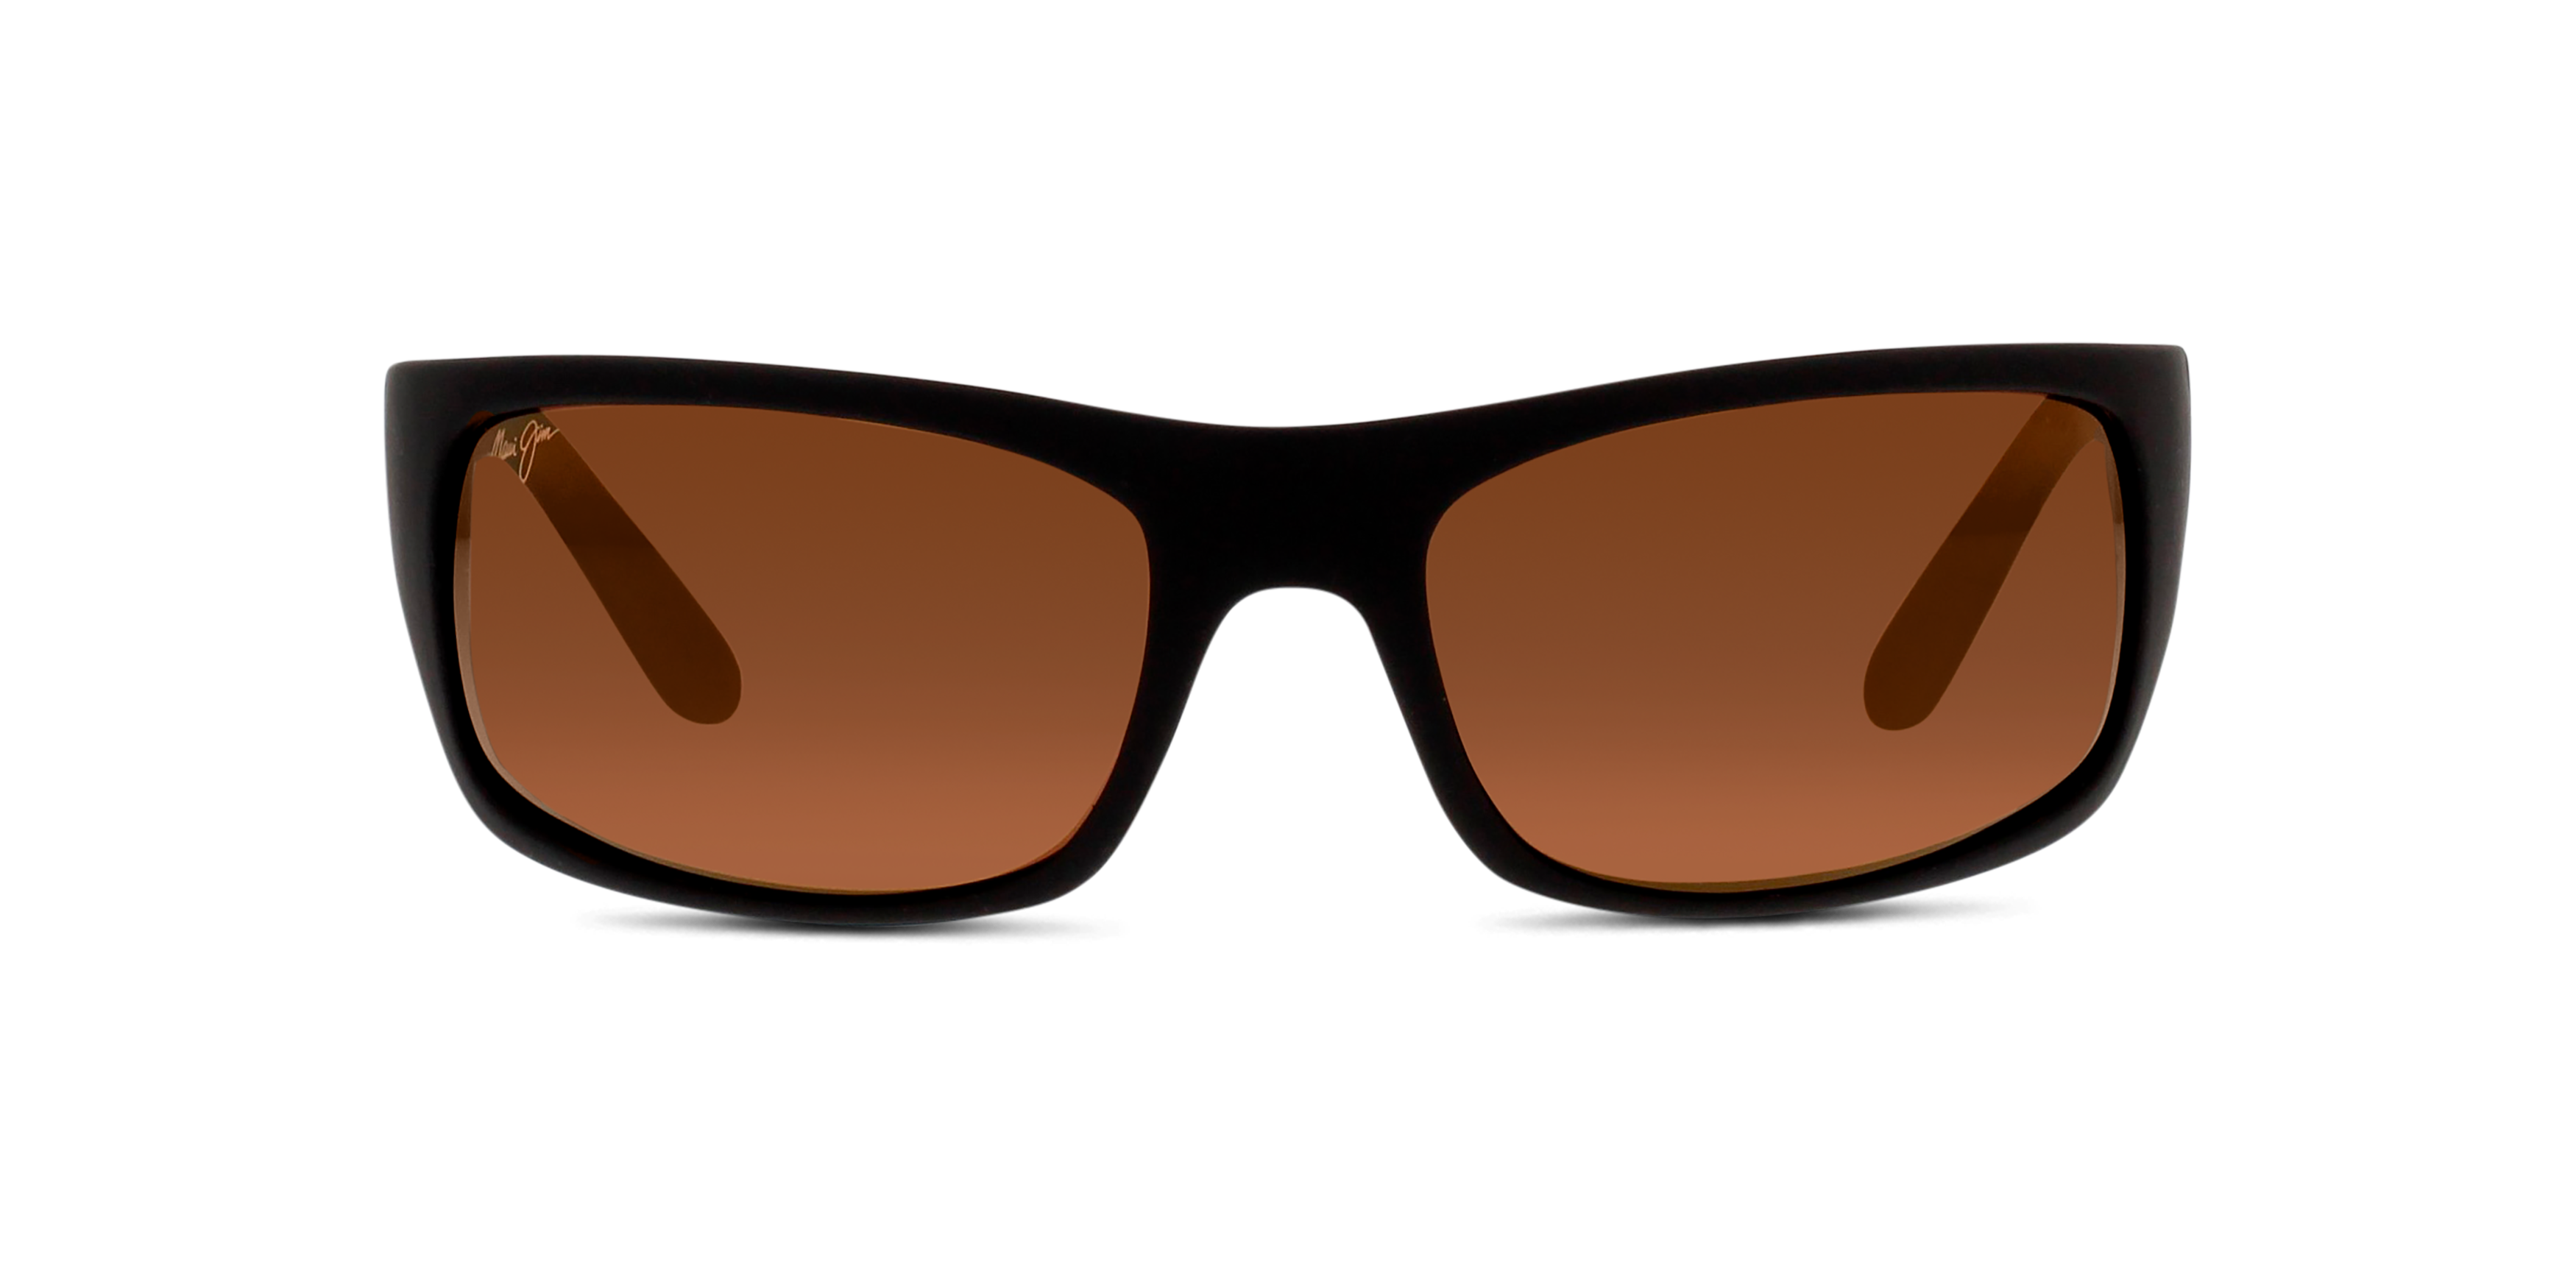 [products.image.front] MAUI JIM 202 Peahi 2M